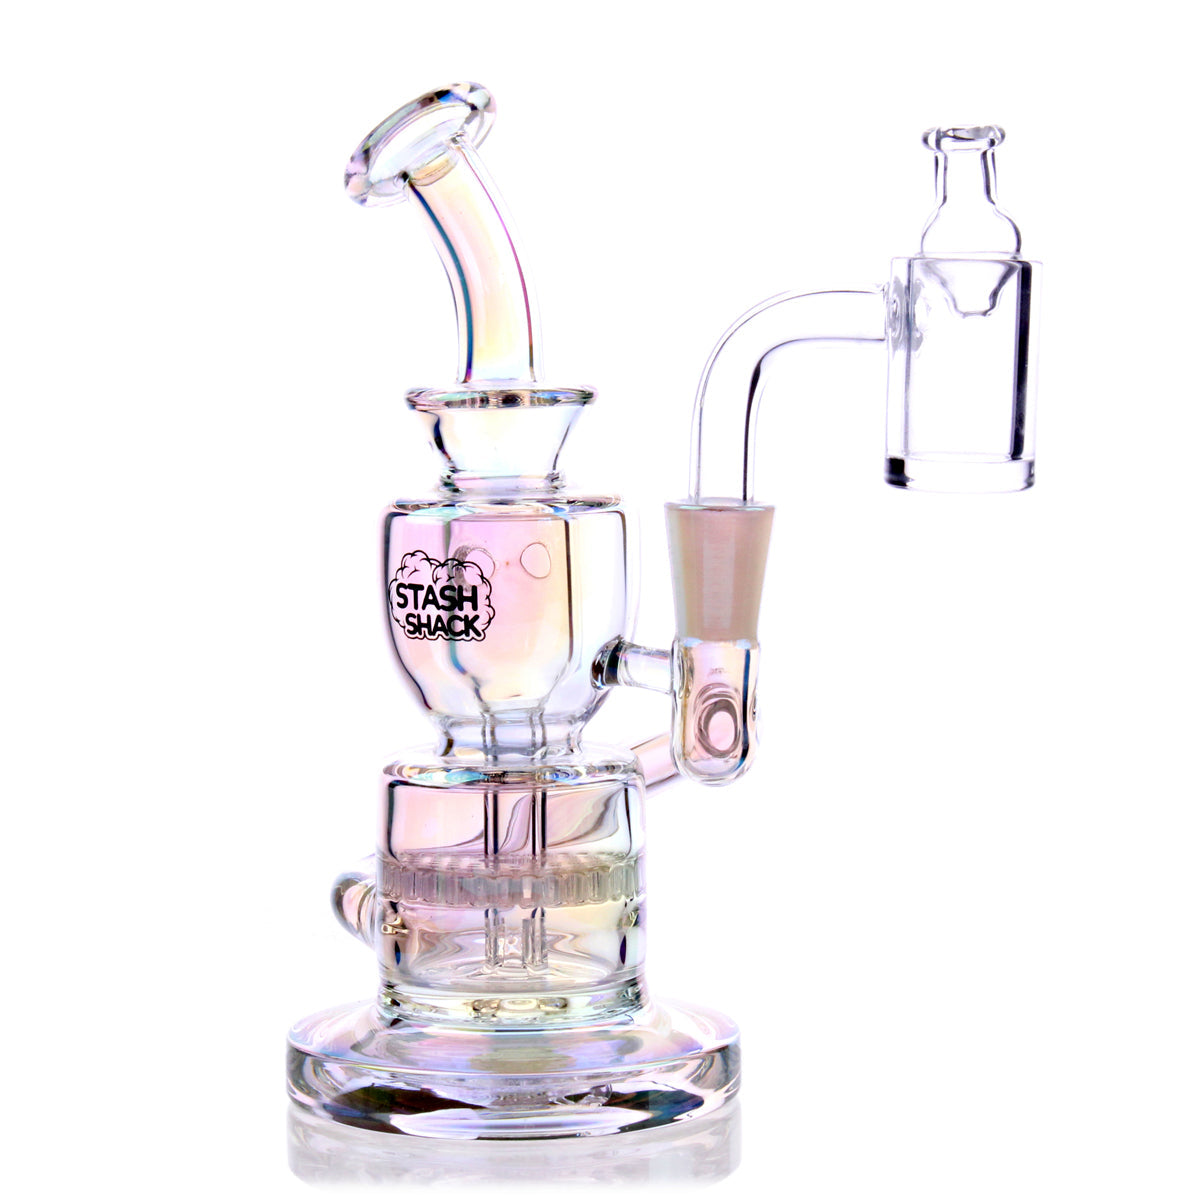 Dahlia Mini Rig by The Stash Shack, 5.5" with Honeycomb Percolator, Front View on White